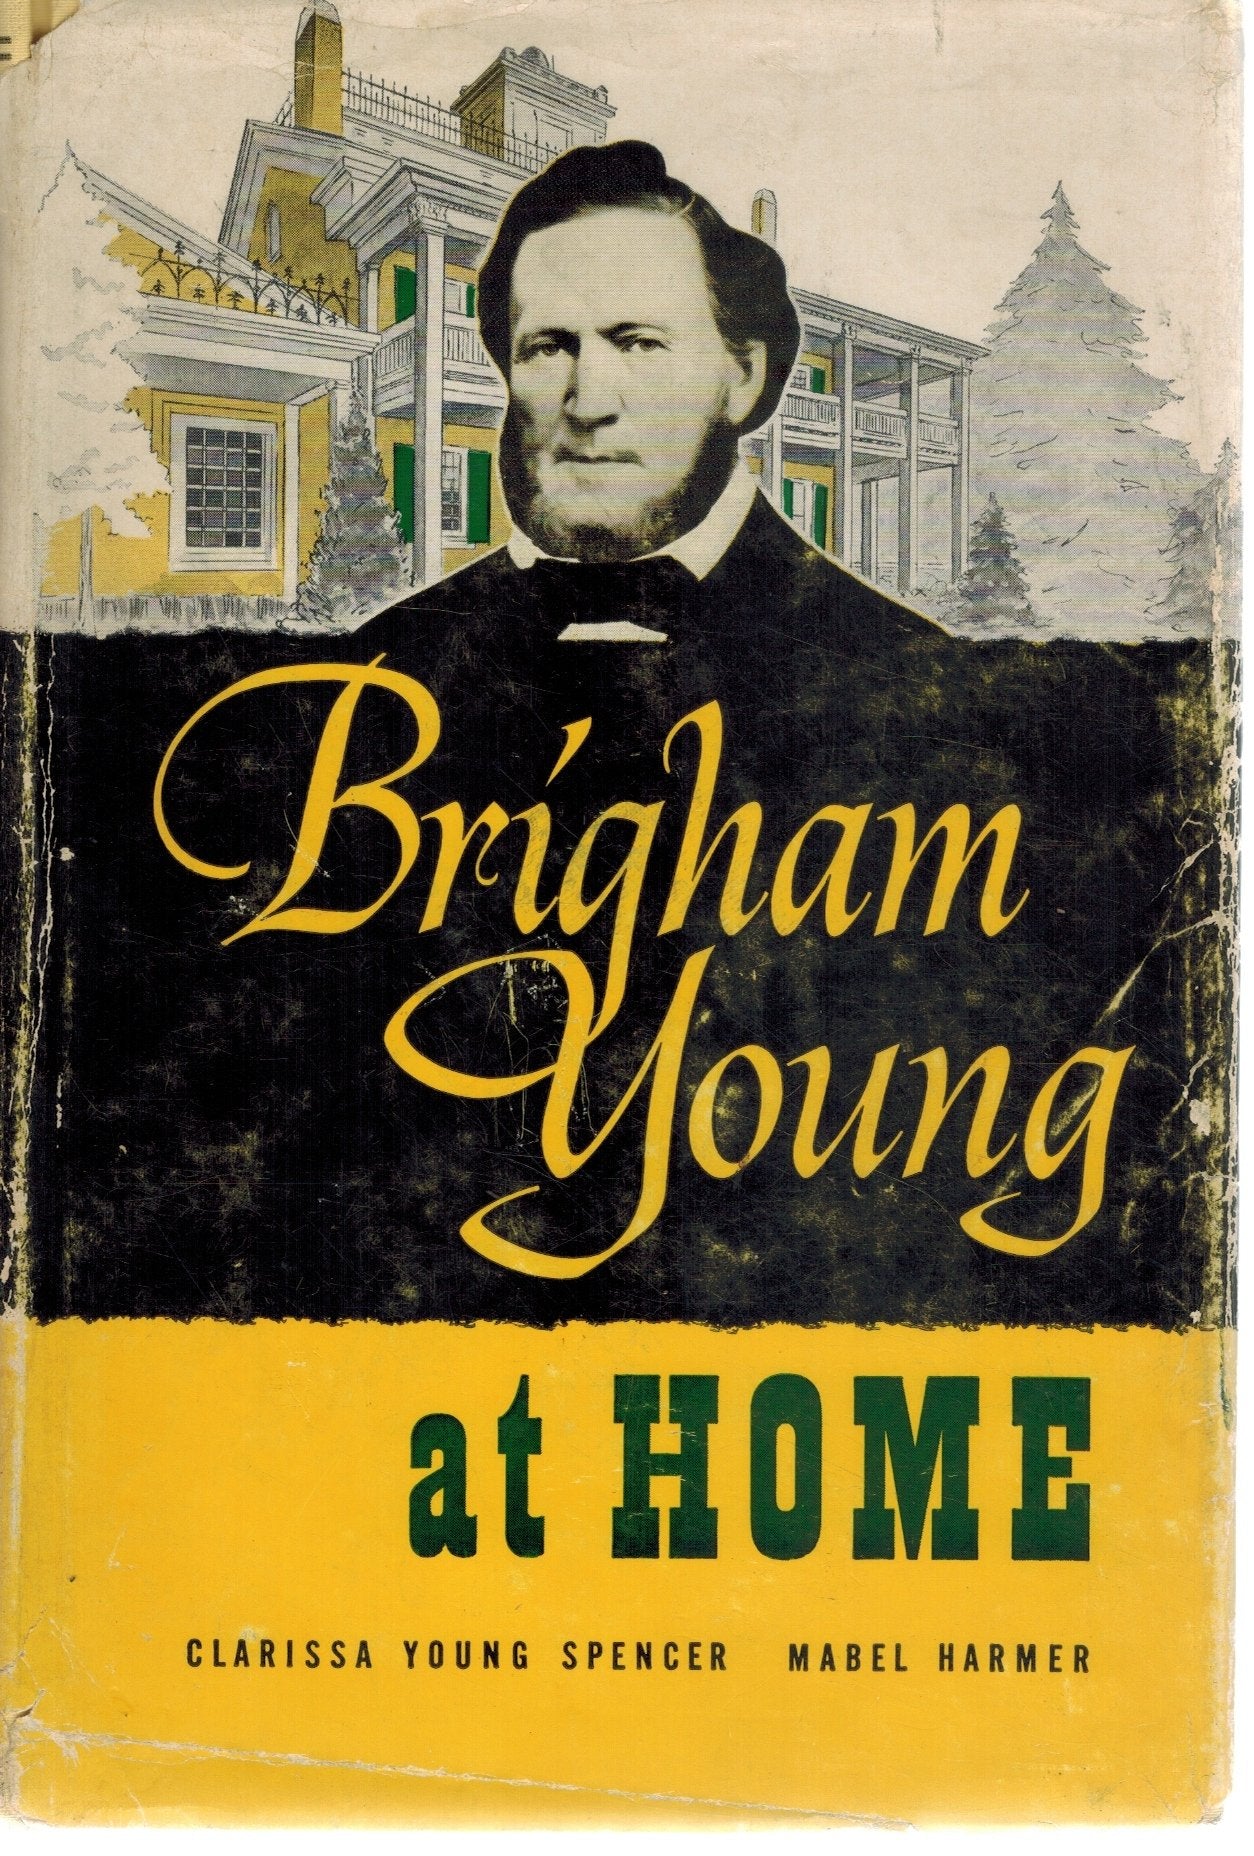 BRIGHAM YOUNG AT HOME  by Clarissa Young Spencer with Mabel Harmer